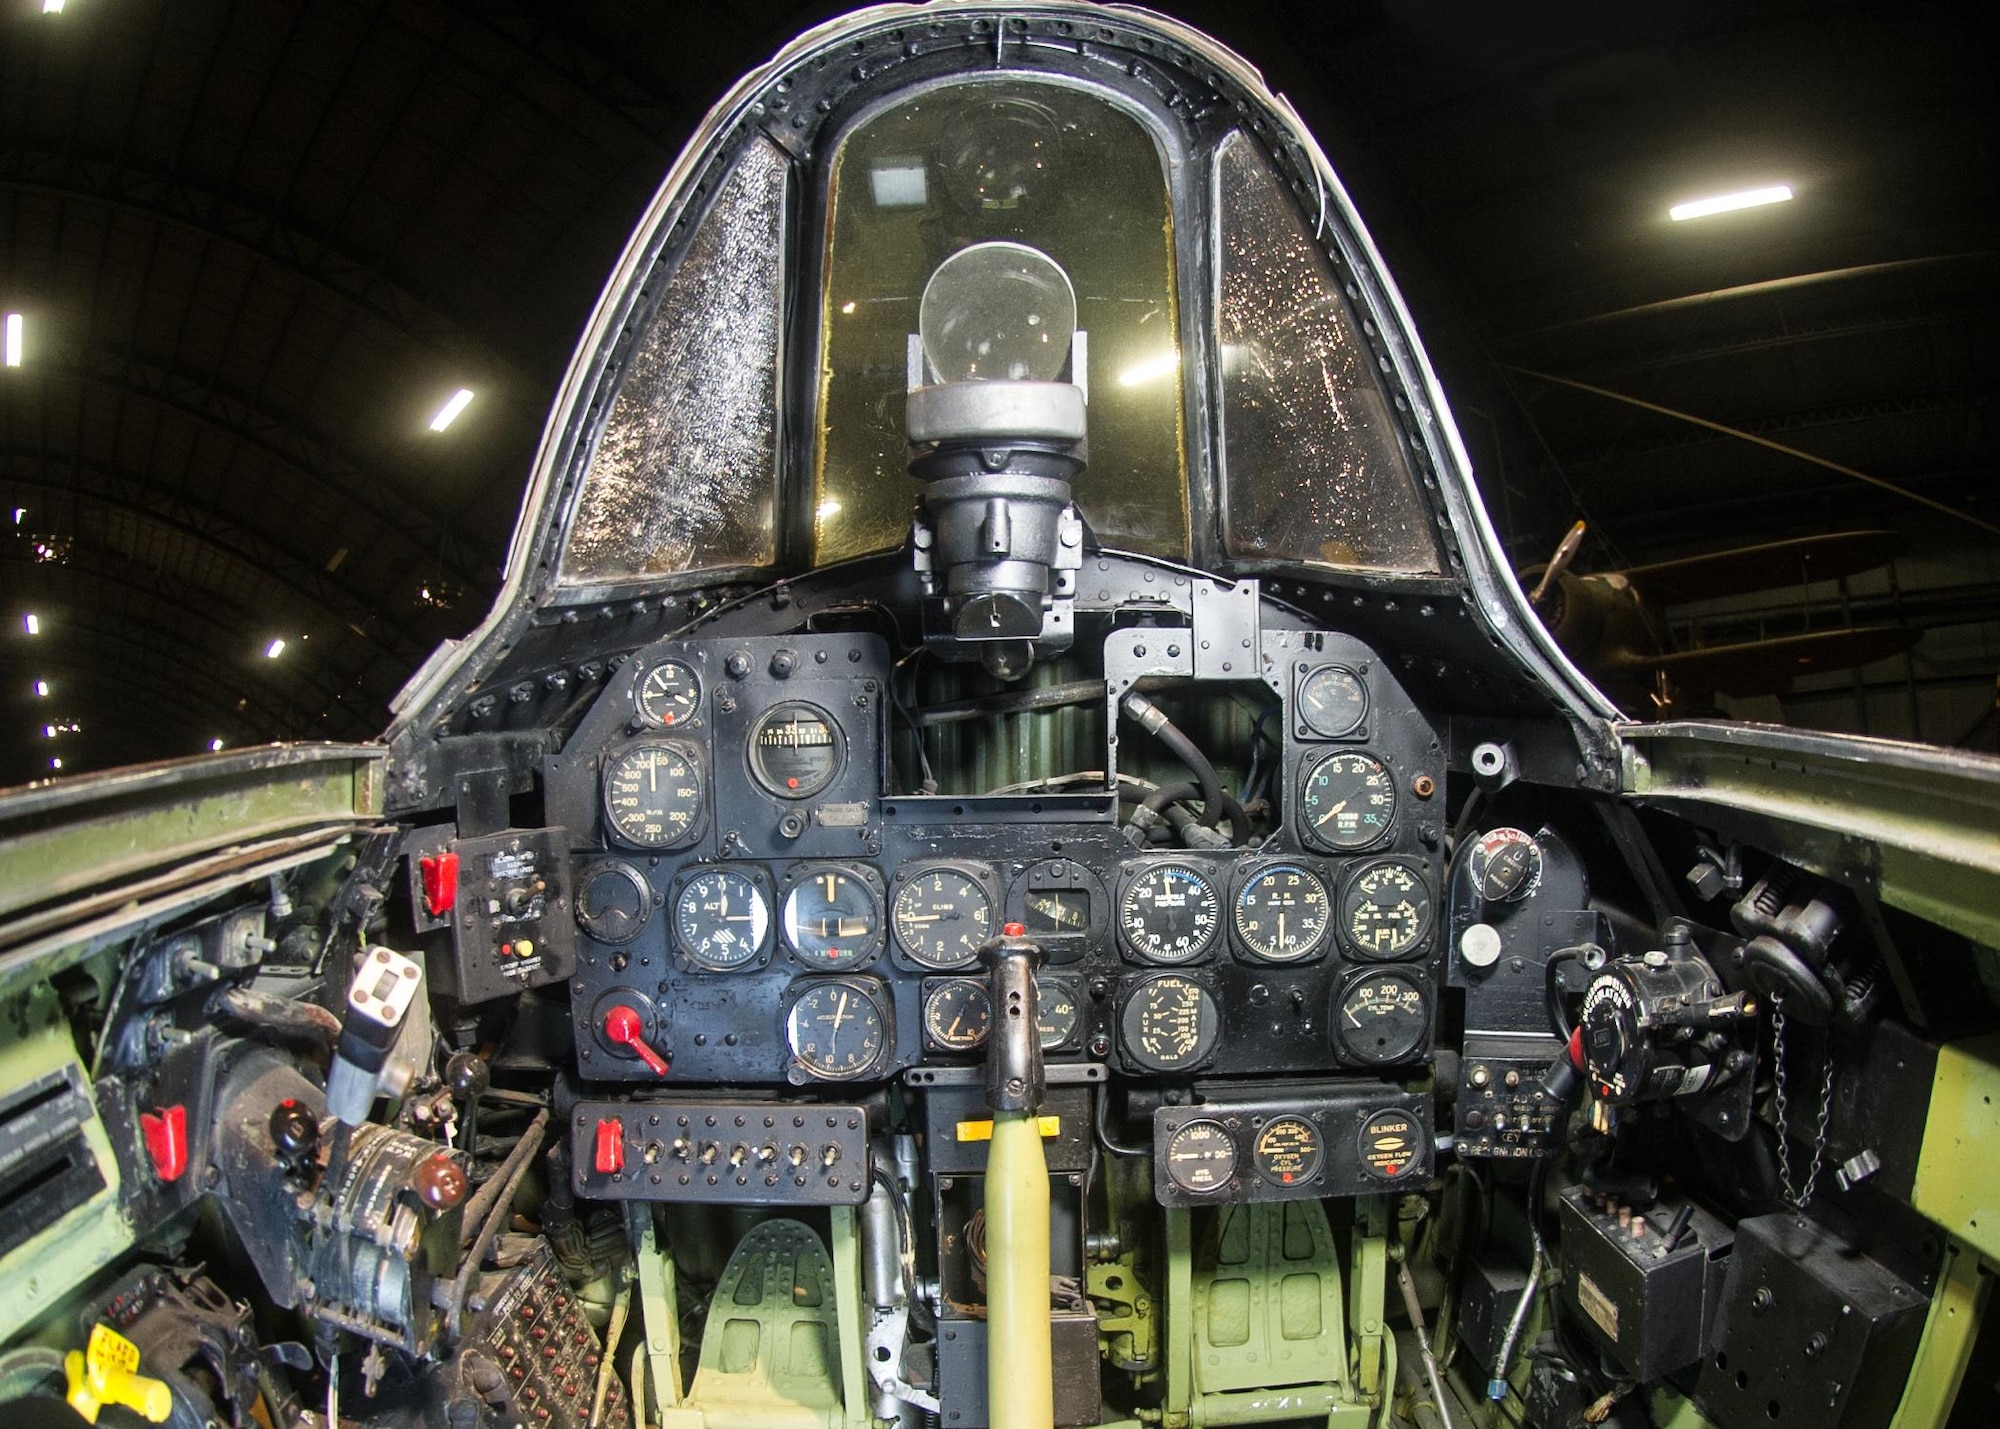 DAYTON, Ohio -- Republic P-47D cockpit at the National Museum of the United States Air Force. (U.S. Air Force photo)